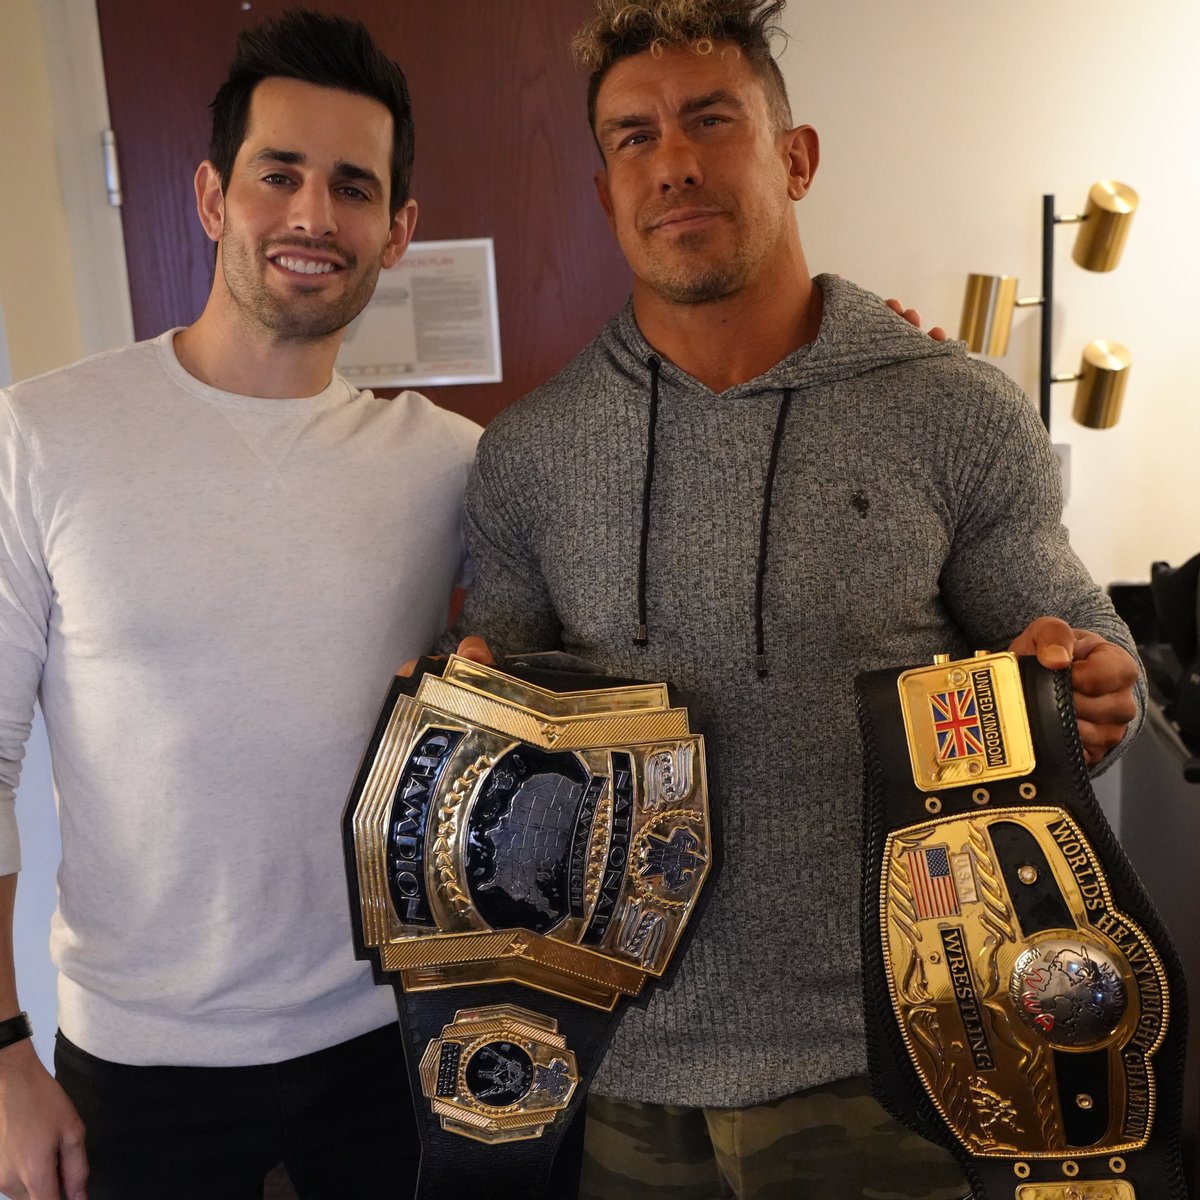 New episode with @therealec3 is up now 💪 He talks about winning the @nwa Worlds Heavyweight Championship, retiring @PlanetTyrus, his WWE run, working for Dixie Carter in TNA, Control Your Narrative and much more! Watch/listen: podcast.chrisvanvliet.com